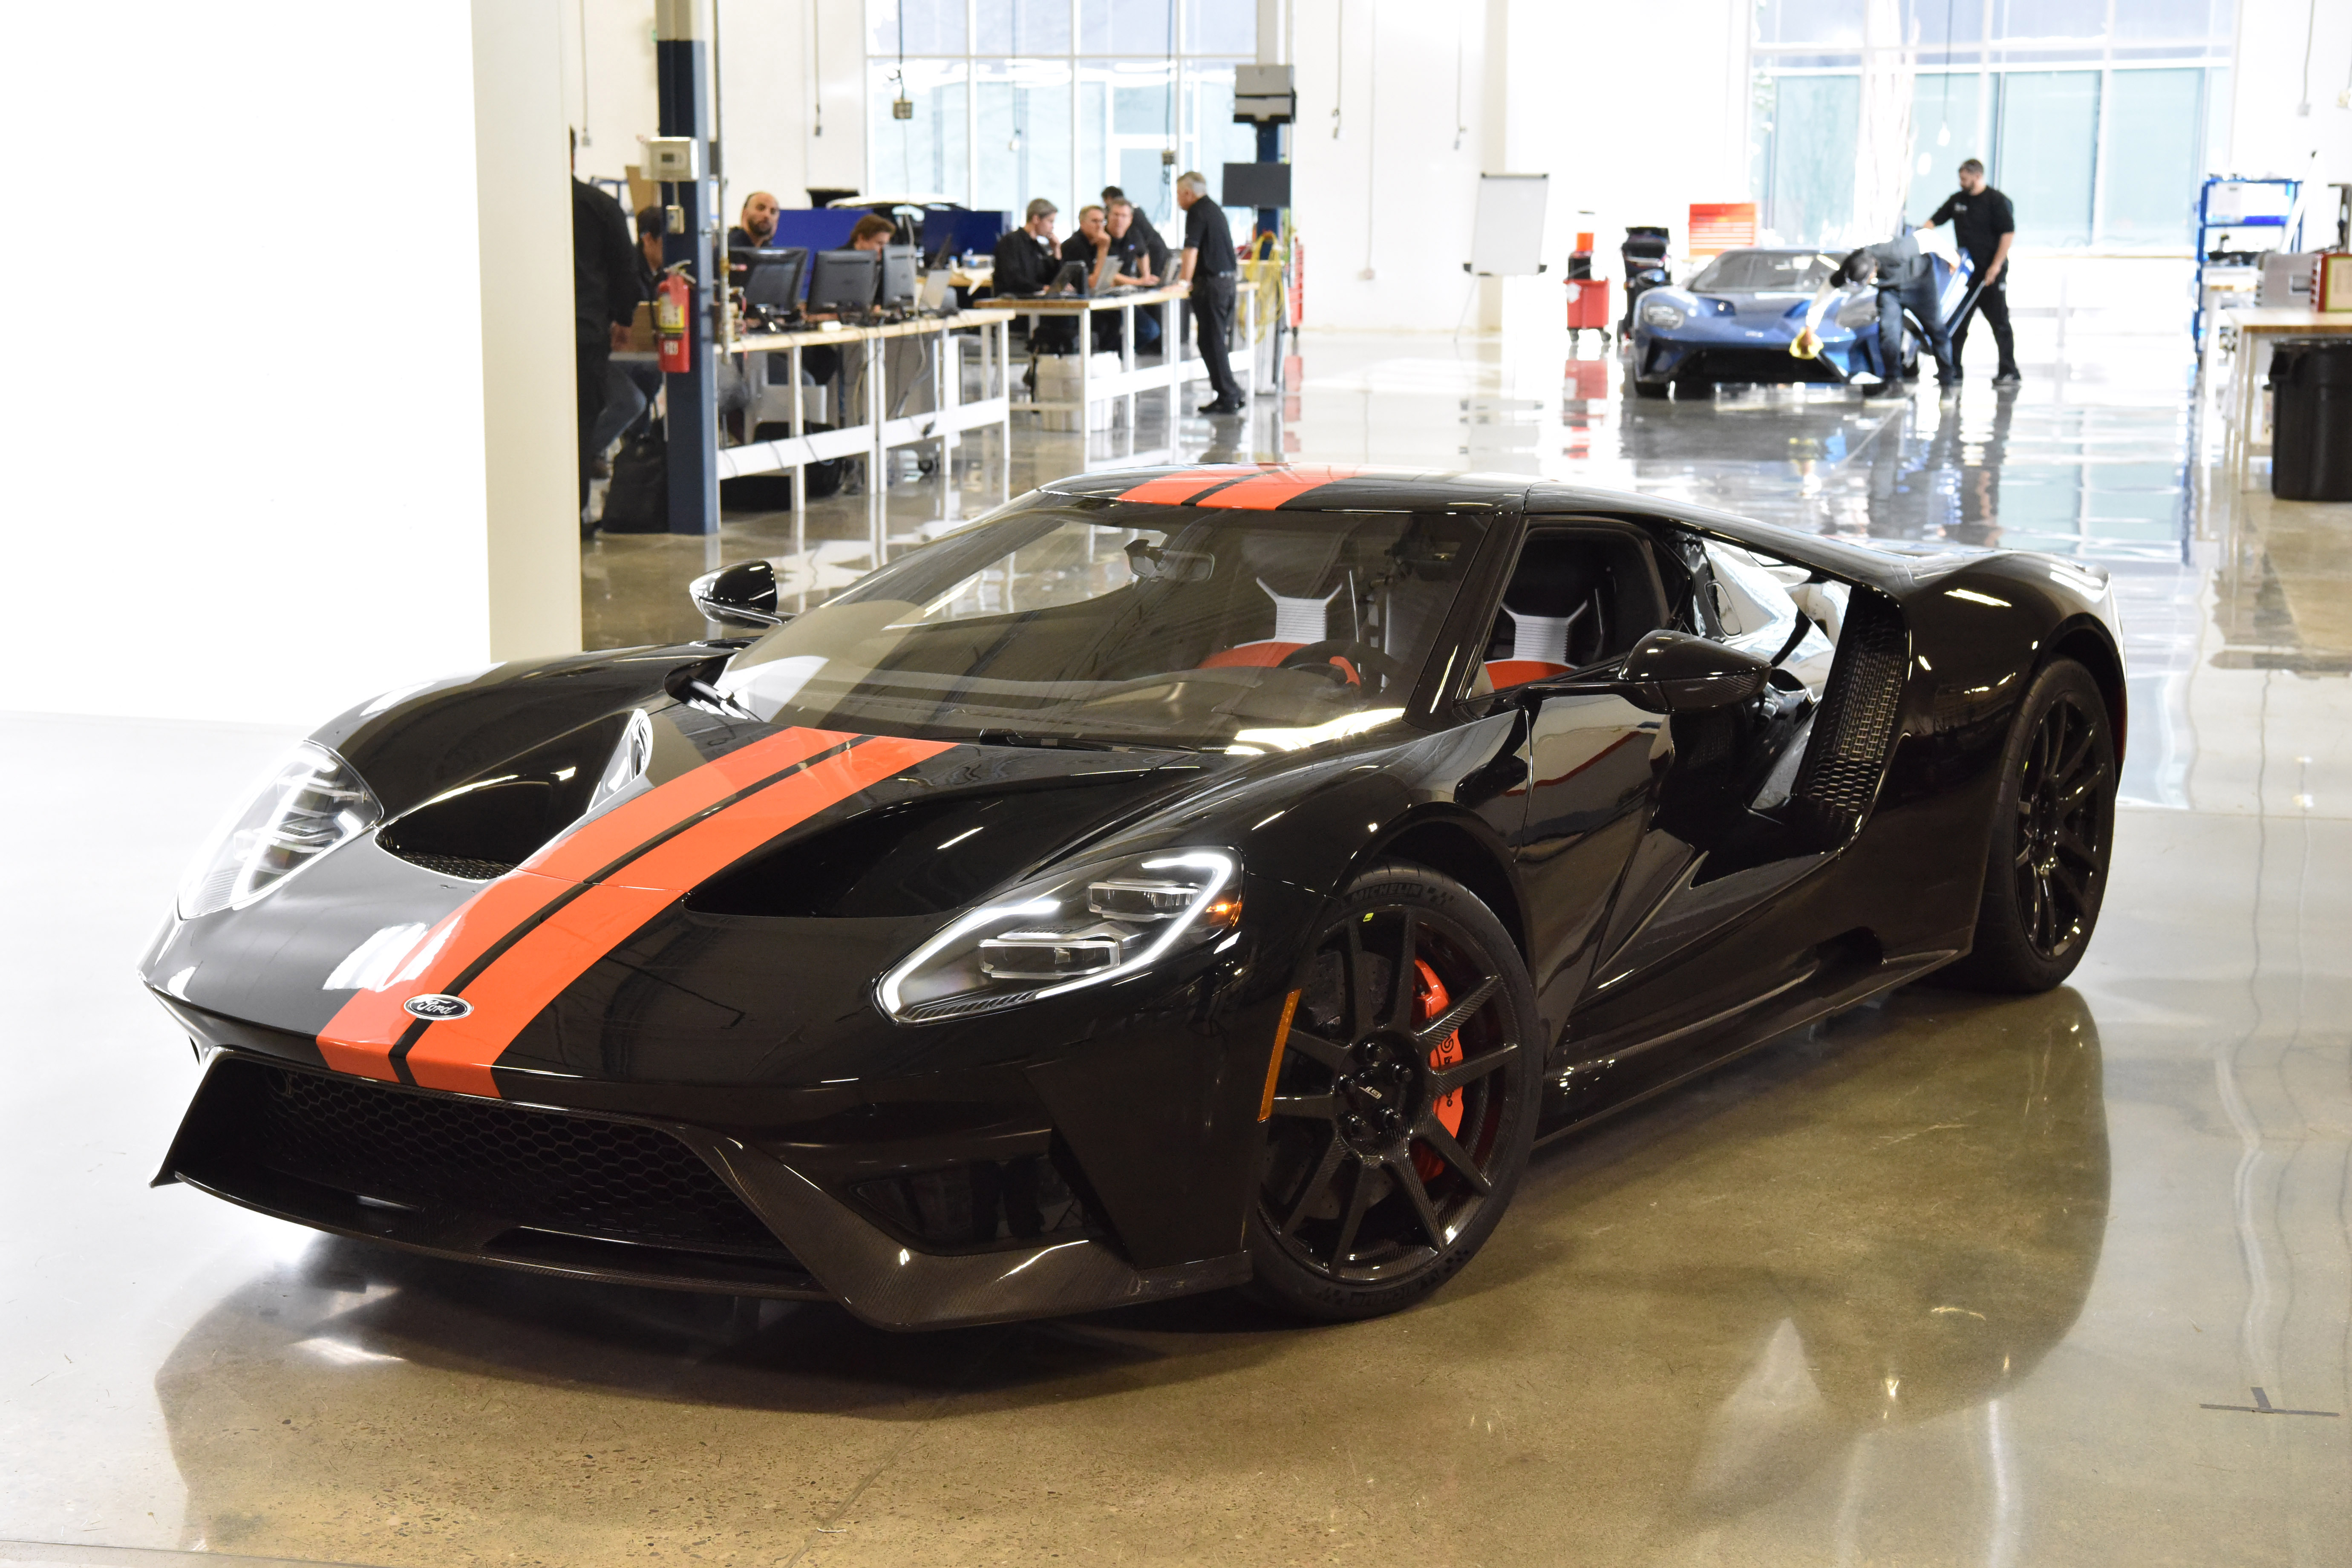 MARKHAM, Ontario, Canada, Dec. 16, 2016--Raj Nair, Ford executive VP, global product development and chief technical officer, drove the Ford GT supercar off the line to help celebrate the event along with employees and guests. The all-new Ford GT is entering the final phase of development and production has begun. One of the first Ford GTs is being driven off the line at the Multimatic assembly location with the first behind the scenes look at the assembly line for all-new Ford GT. The Ford GT is the culmination of years of Ford innovation in aerodynamics, lightweight carbon fiber construction and ultra-efficient EcoBoost engines. Photo by: Sam VarnHagen